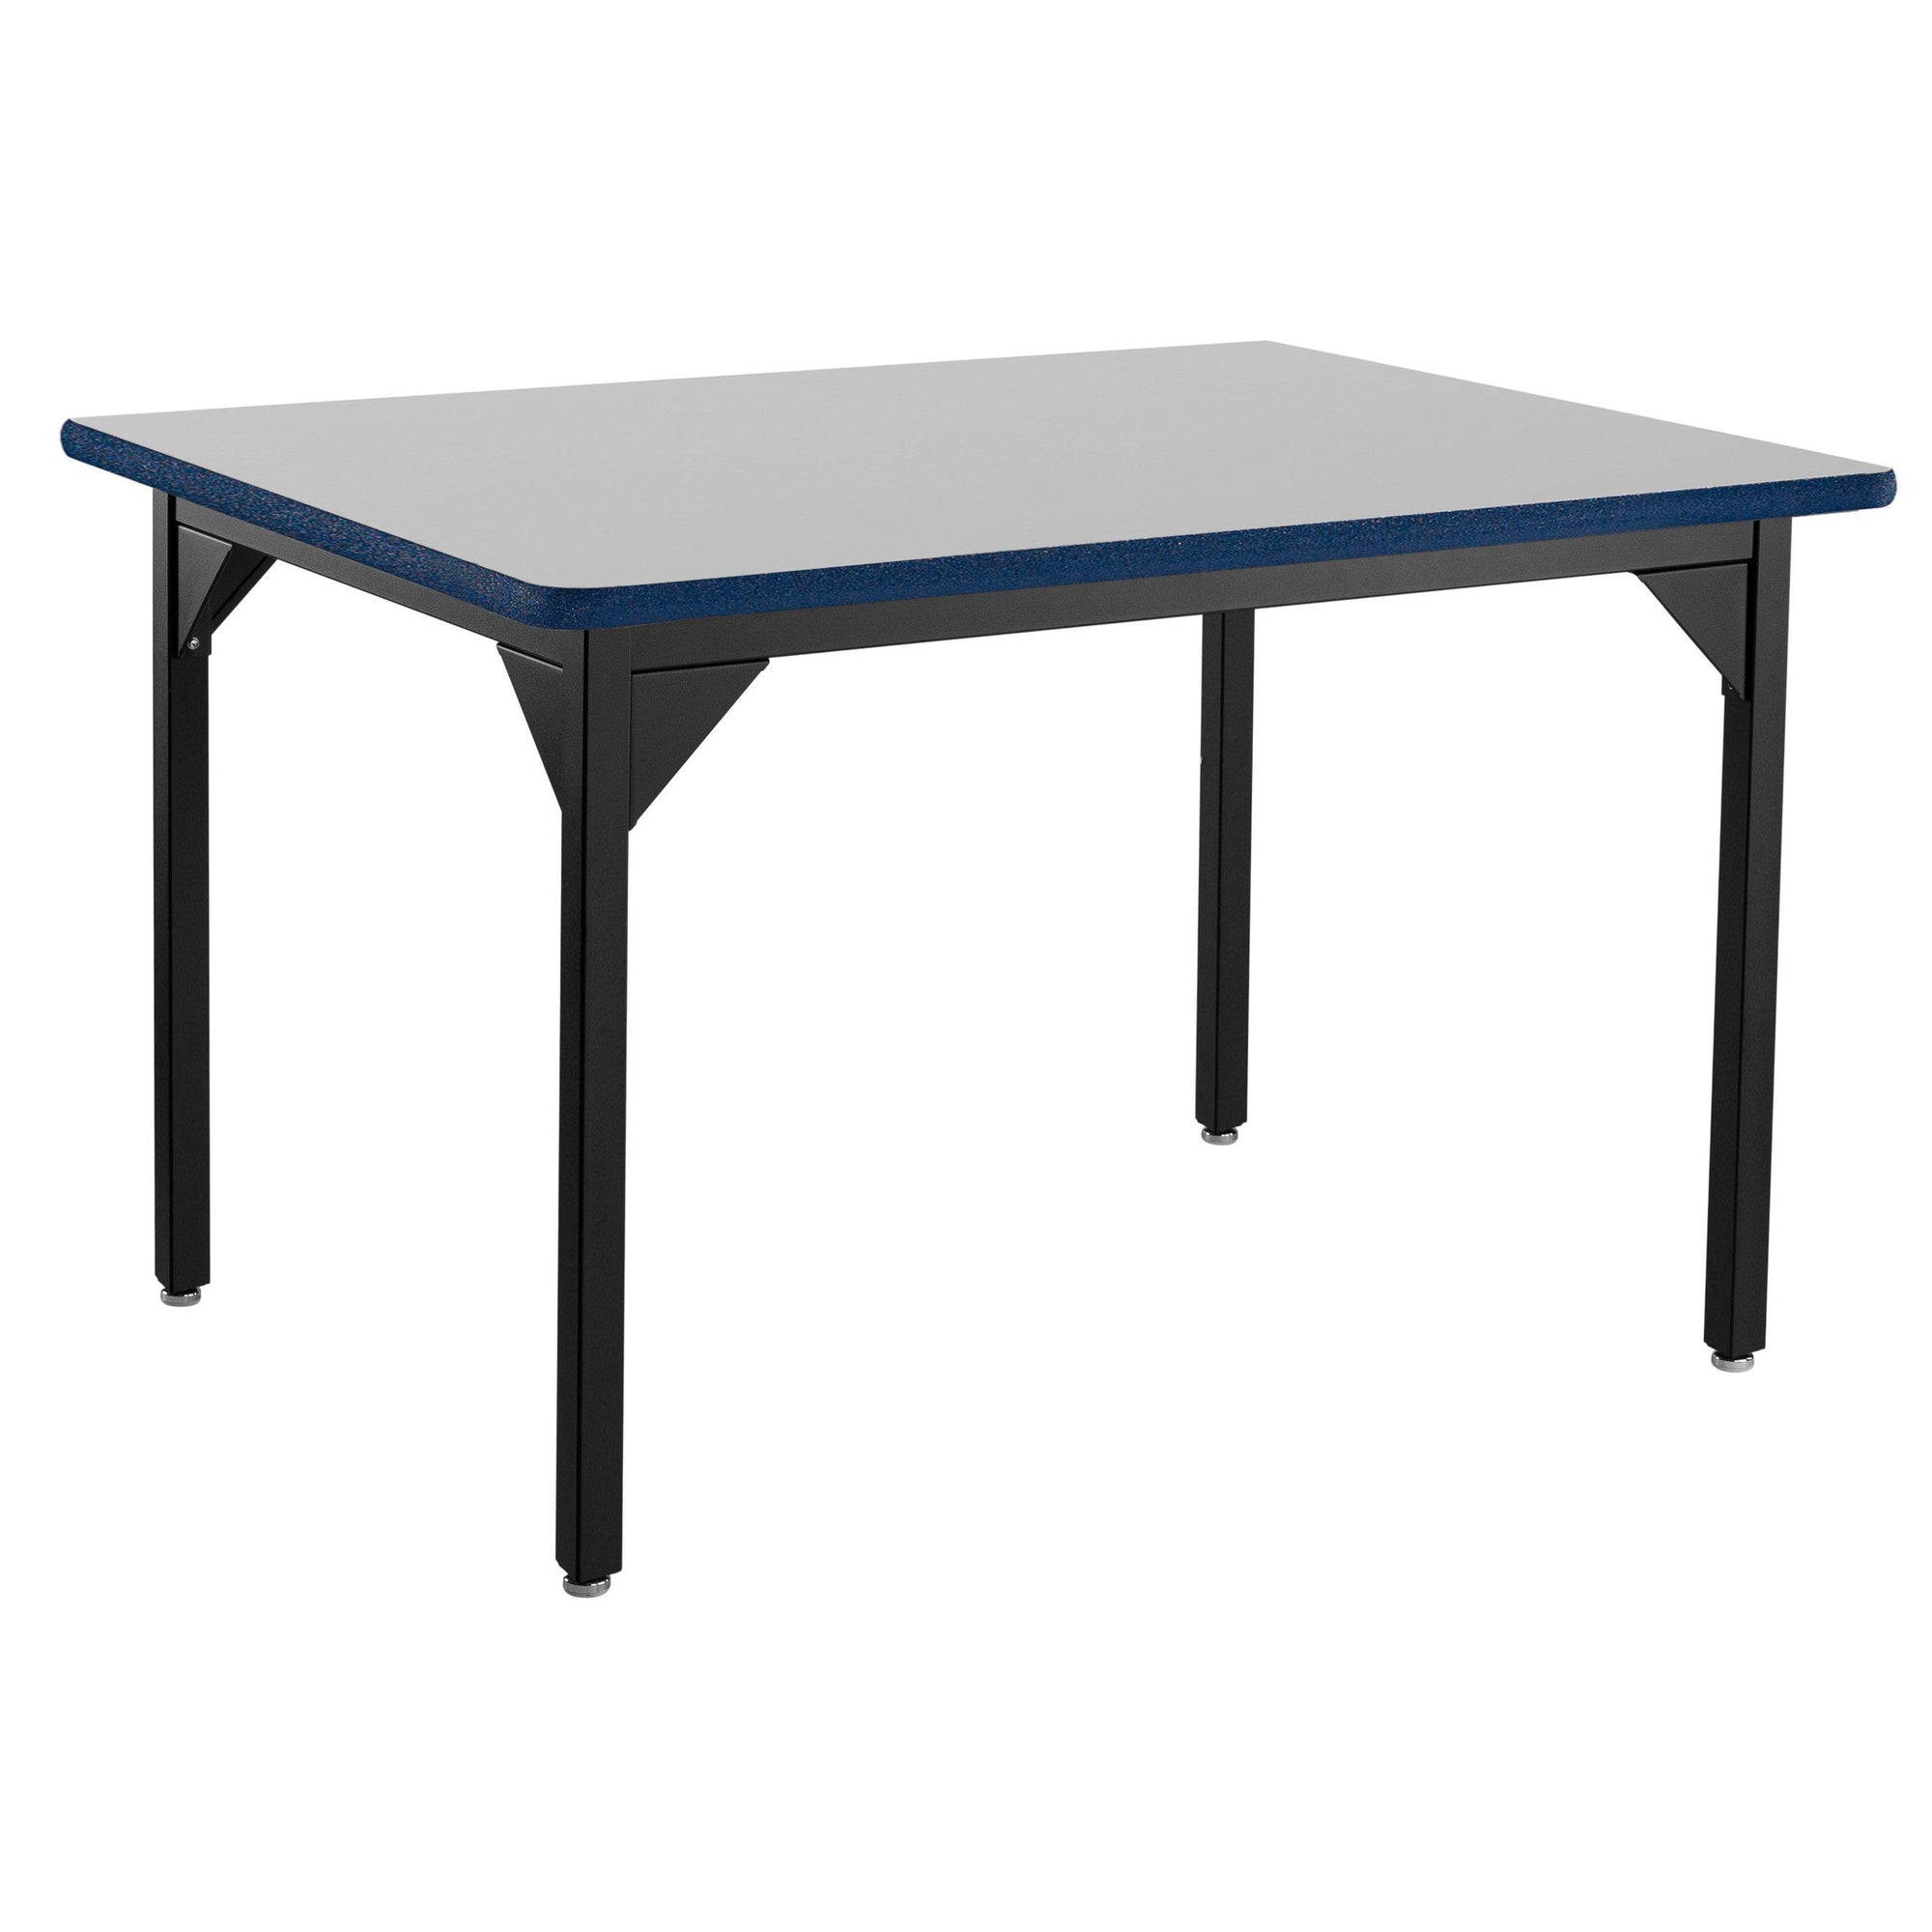 Heavy-Duty Fixed Height Utility Table, Black Frame, 36" x 60", Supreme High-Pressure Laminate Top with Black ProtectEdge